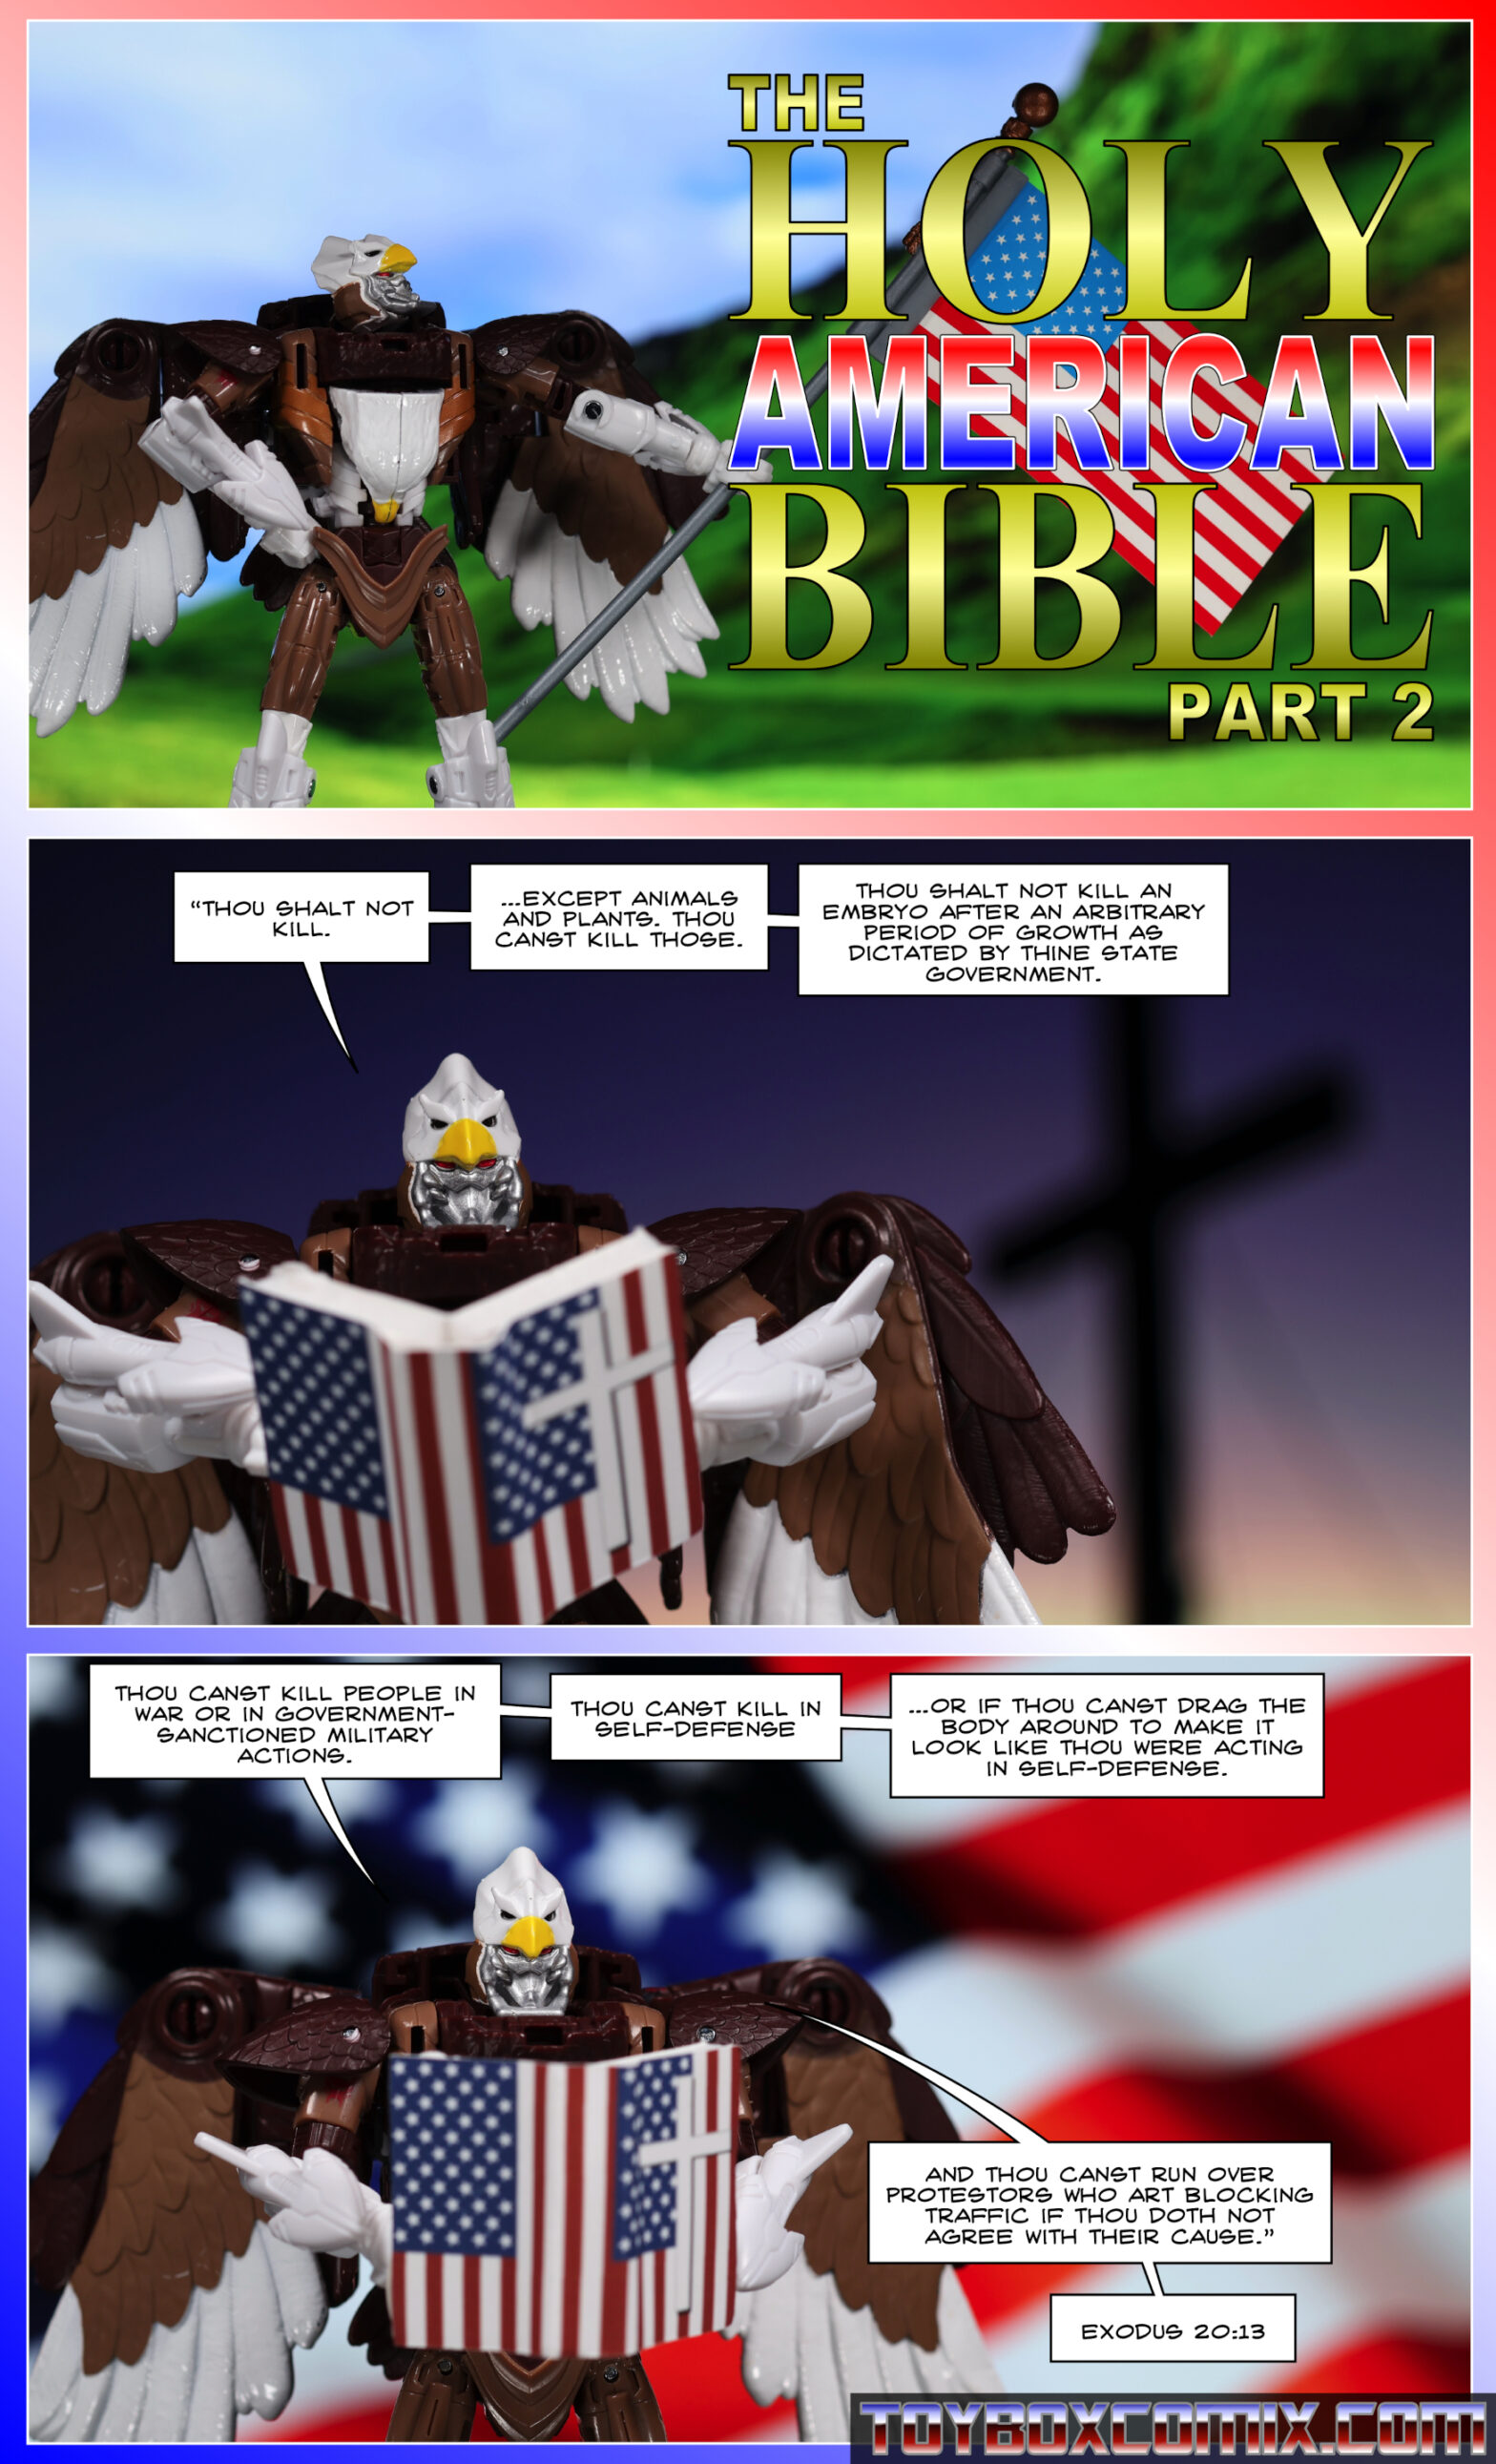 Panel 1: Maximal Skywarp holds an American flag. Dramatic title text: “The Holy American Bible Part 2” 2: Skywarp, reading in front of a cross: “Thou shalt not kill…except animals and plants. Thou canst kill those. Thou shalt not kill an embryo after an arbitrary period of growth as dictated by thine state government.” 3: Skywarp, reading in front of an American flag: “Thou canst kill people in war or in government-sanctioned military actions. Thou canst kill in self-defense…or if thou canst drag the body around to make it look like thou were acting in self-defense. And thou canst run over protestors who art blocking traffic if thou doth not agree with their cause. Exodus 20:13”